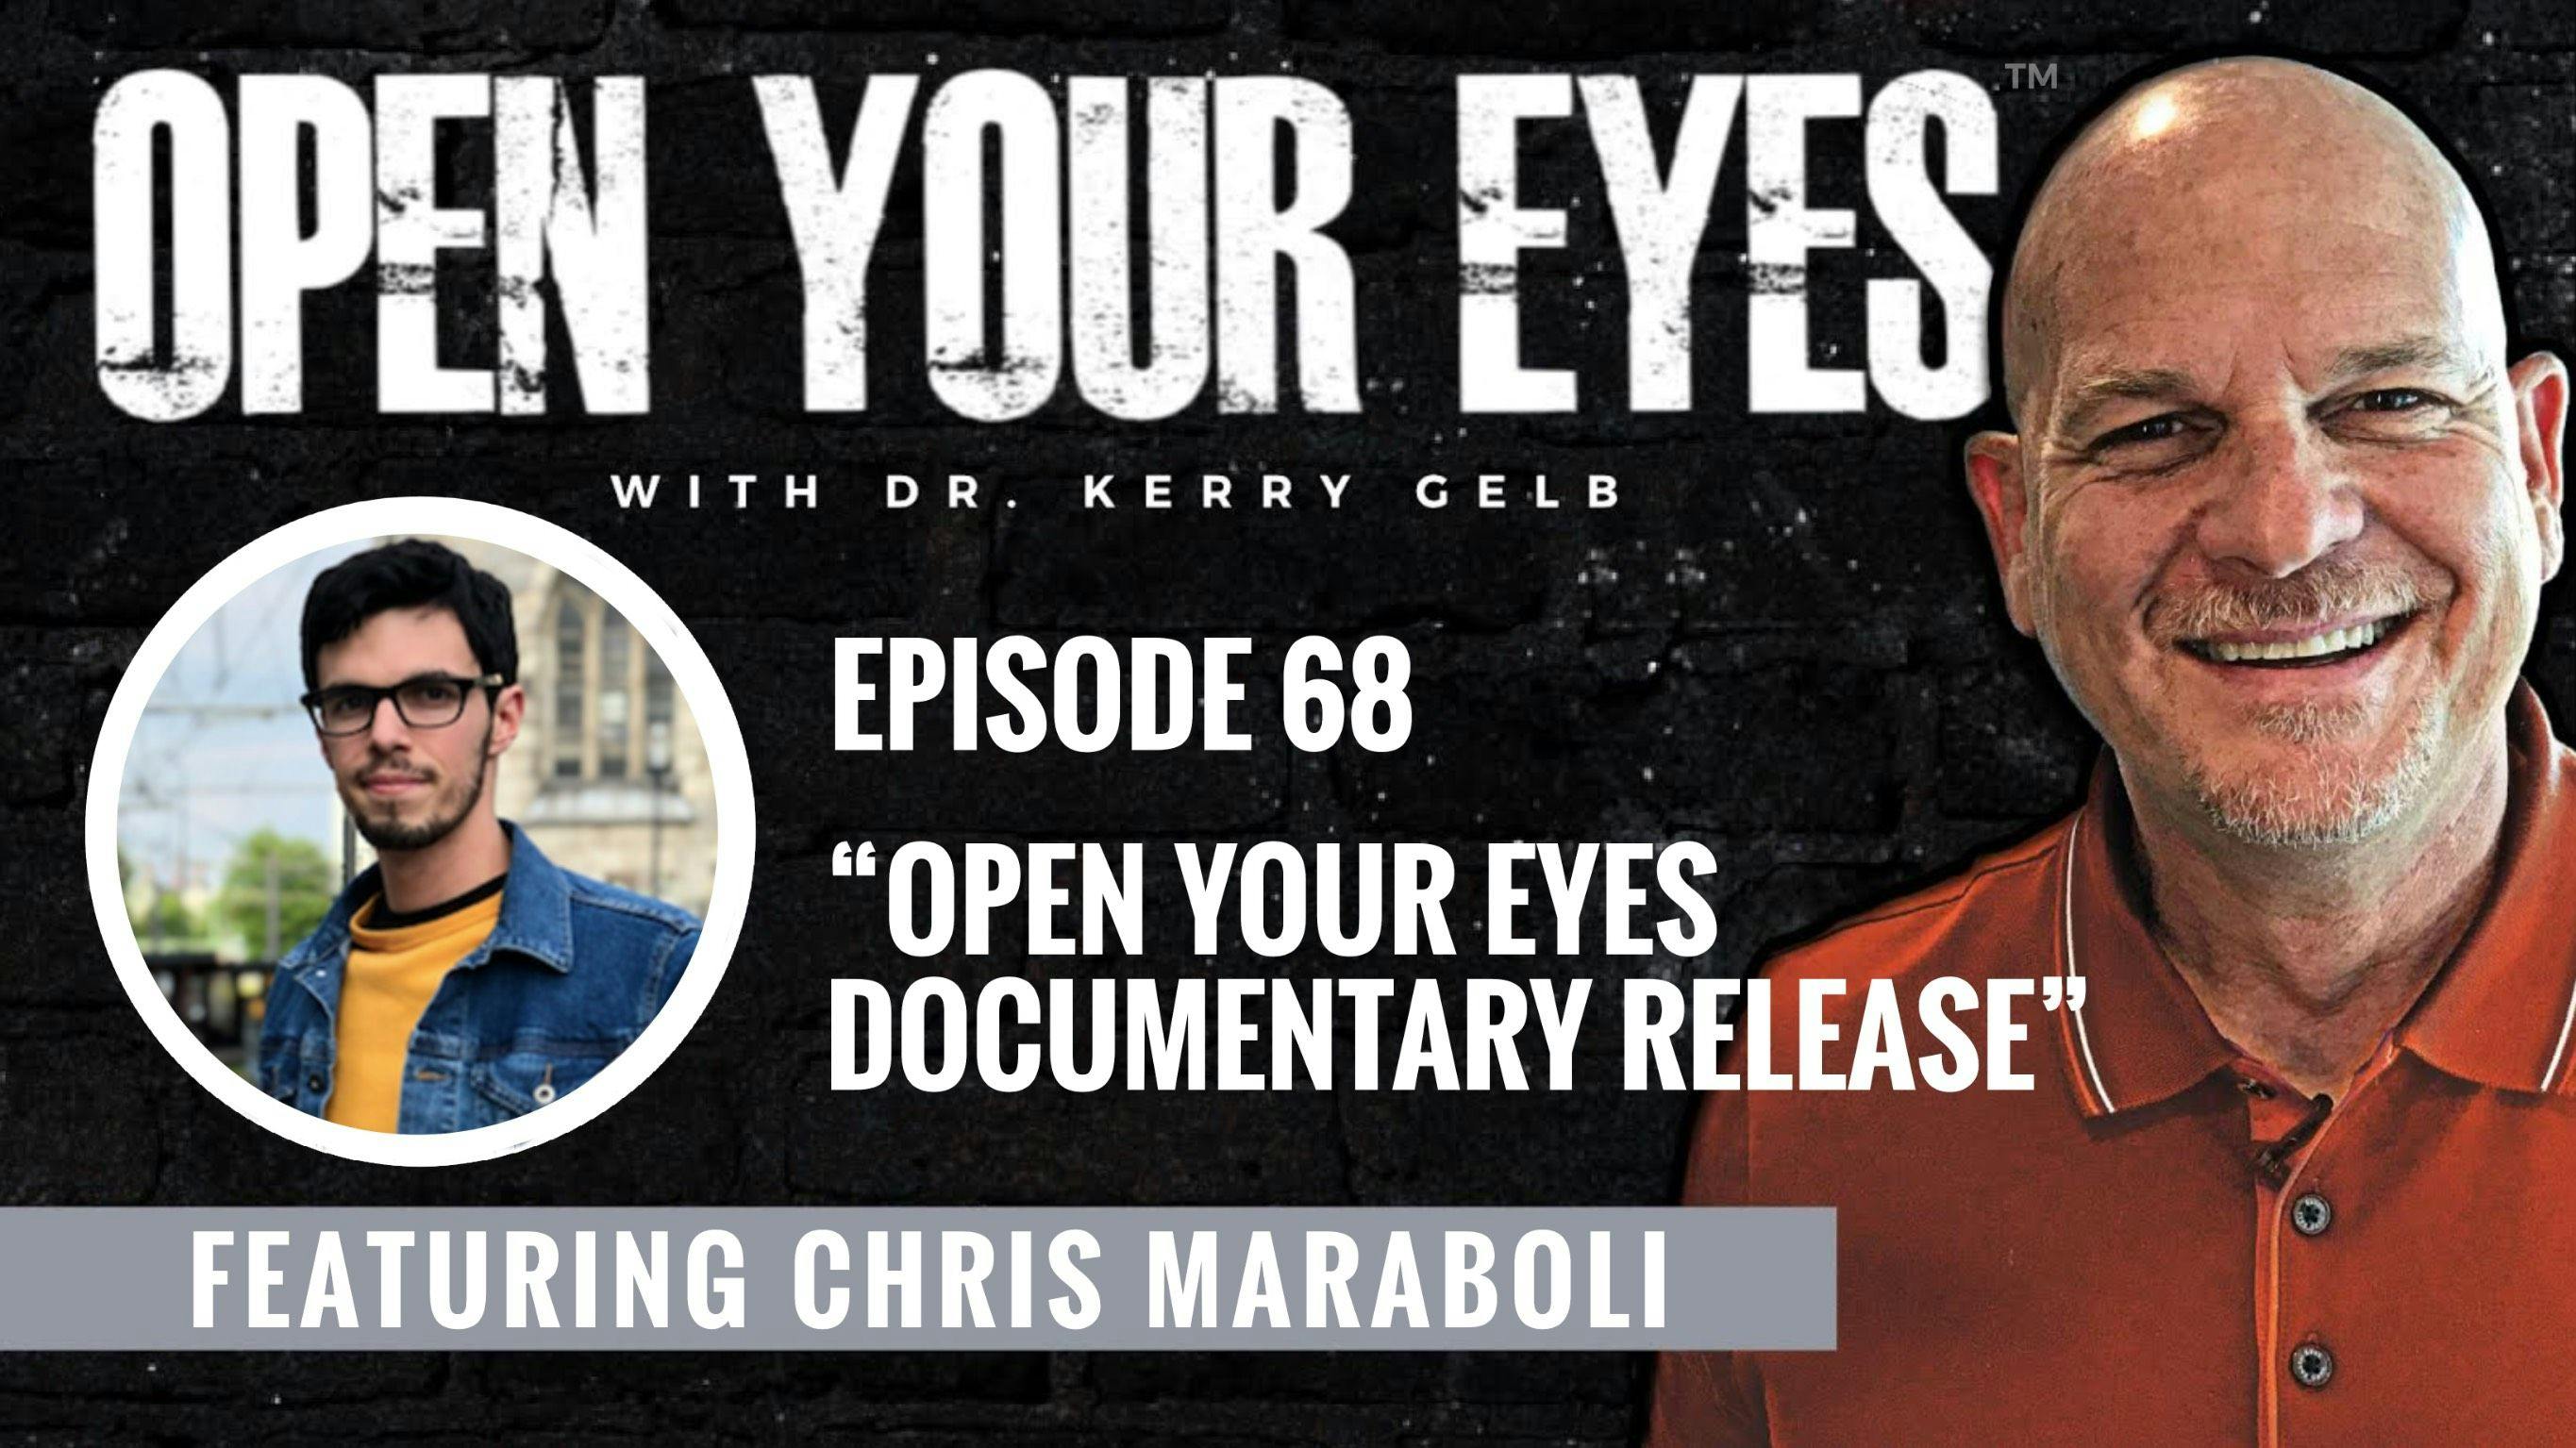 Open Your Eyes documentary released on multiple platforms